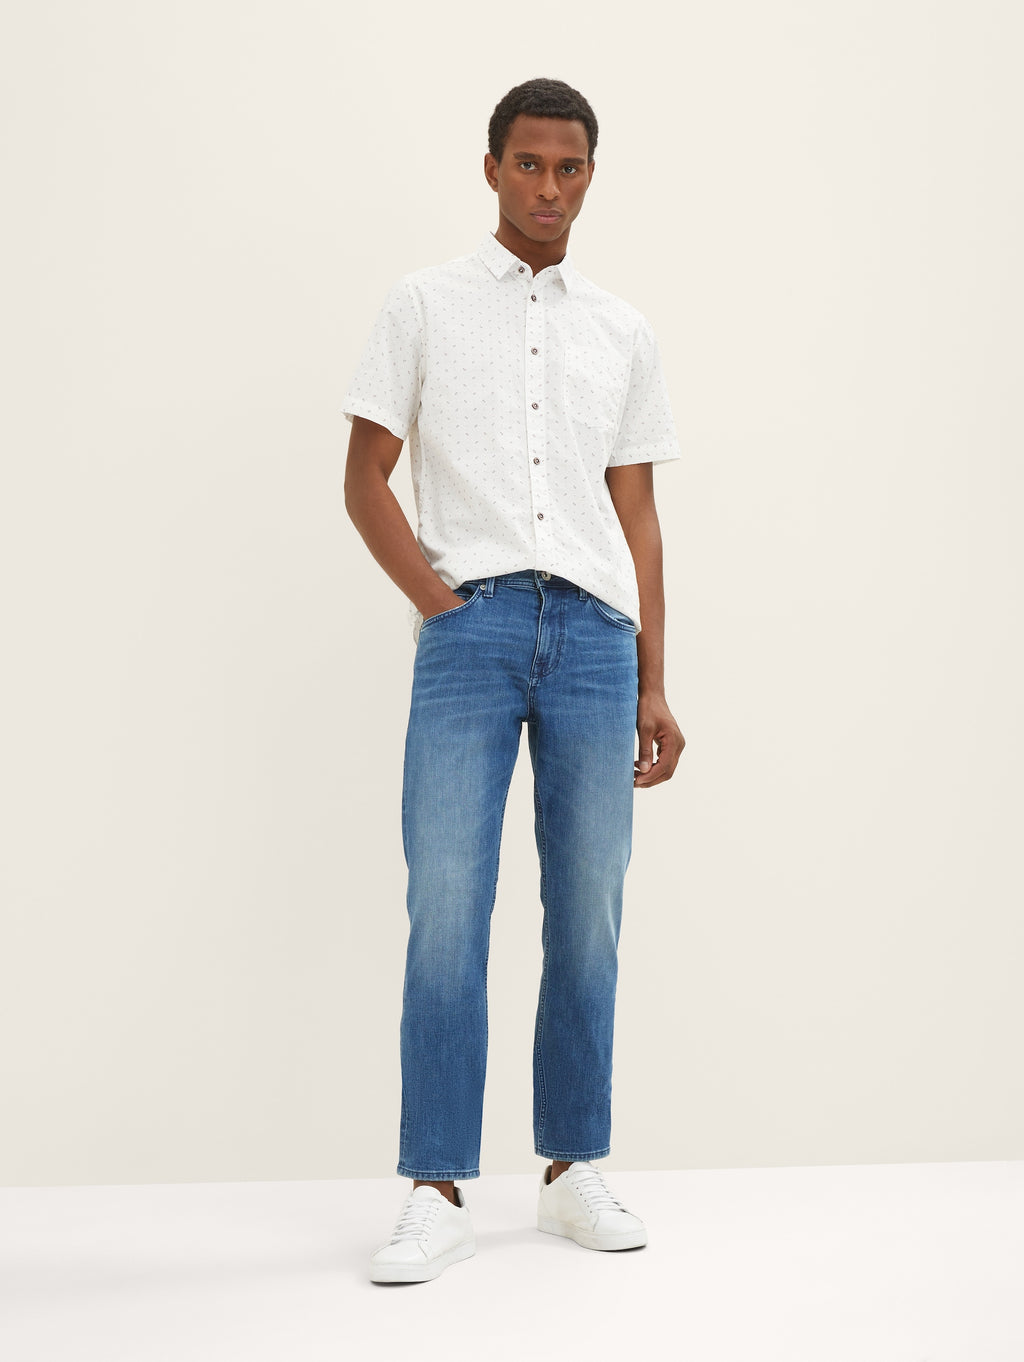 TOM TAILOR Jeans for men - Buy now at Boozt.com